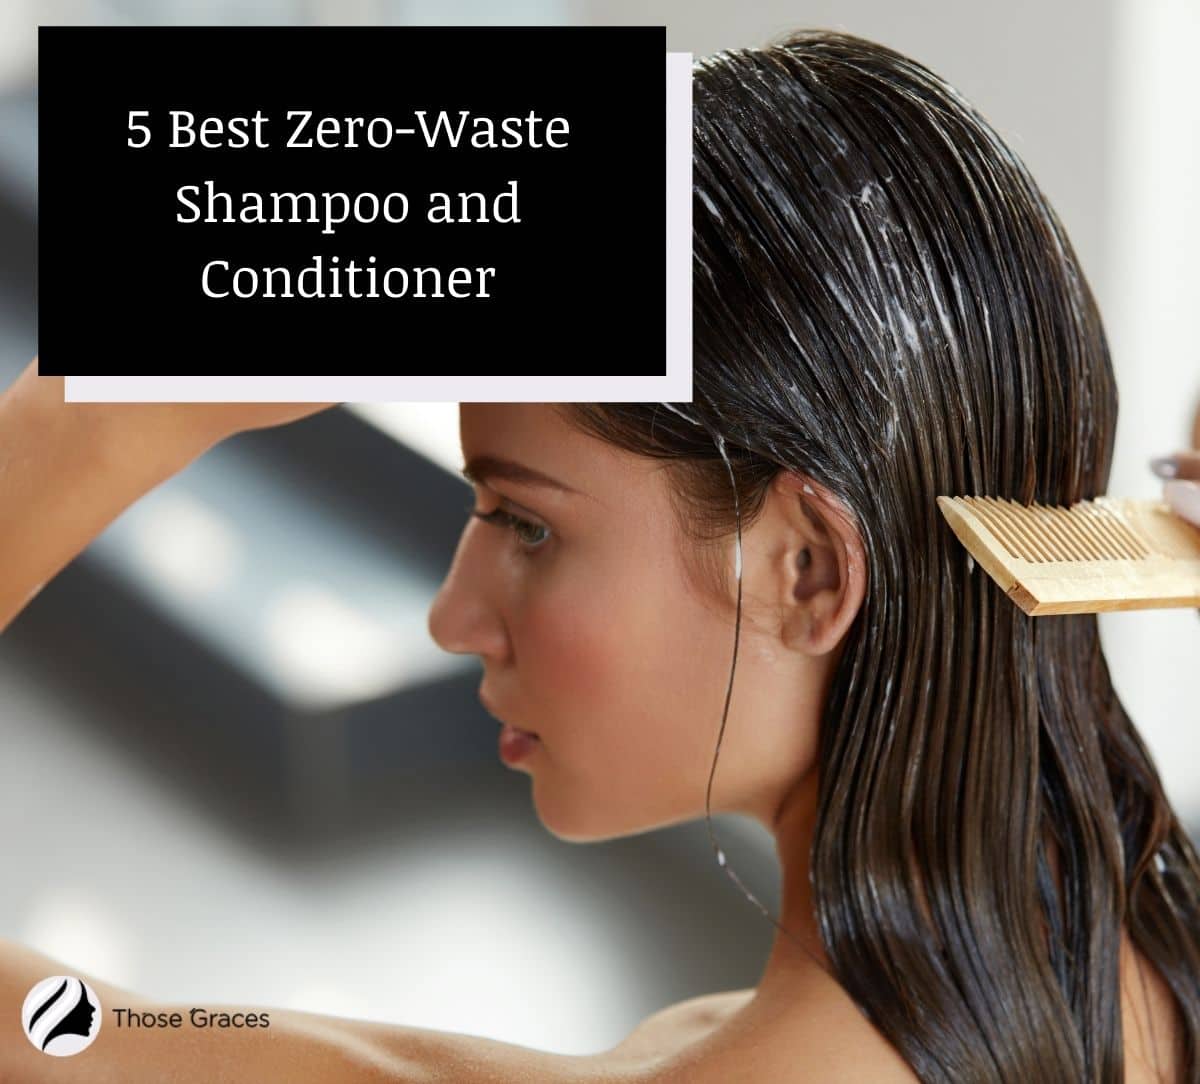 a pretty lading combing her hair with zero waste conditioner